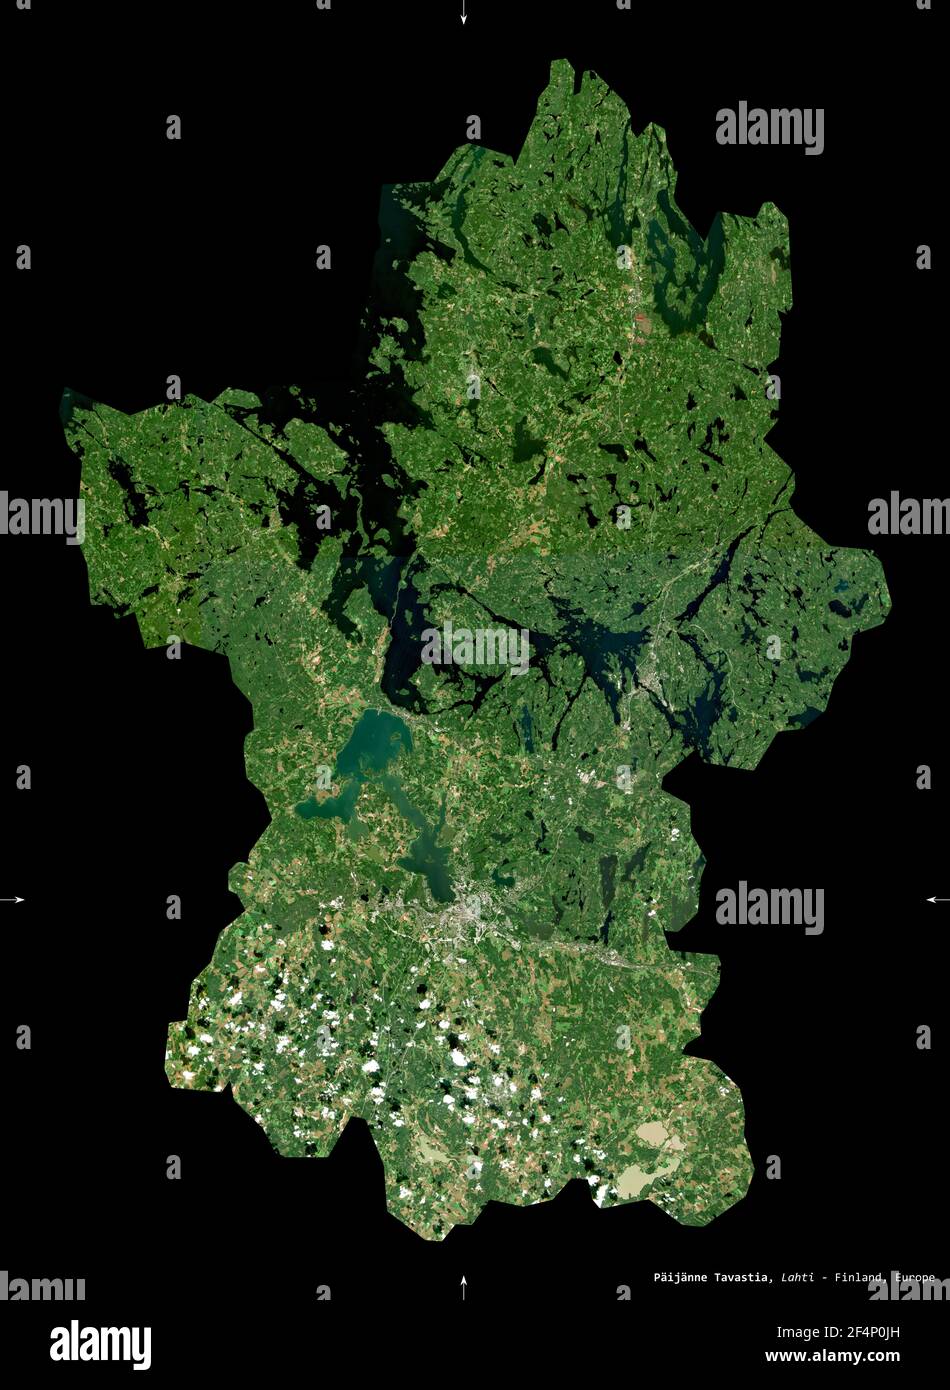 Paijanne Tavastia, region of Finland. Sentinel-2 satellite imagery. Shape isolated on black. Description, location of the capital. Contains modified C Stock Photo